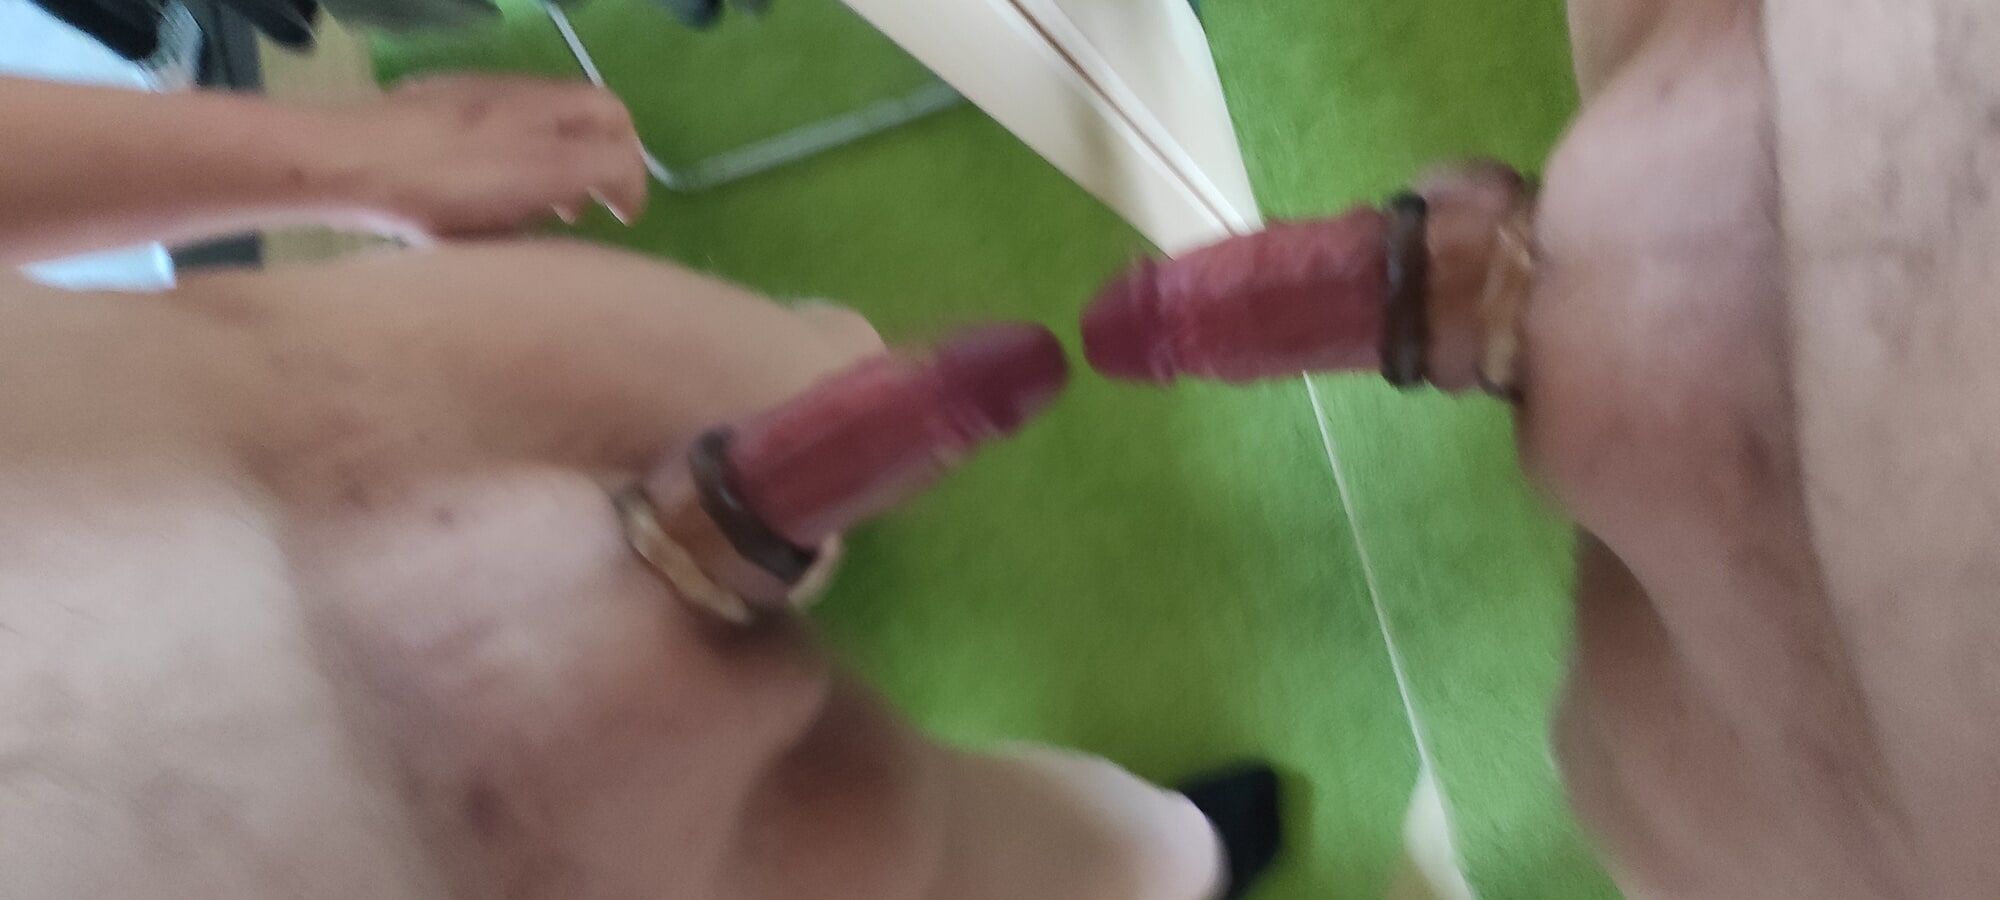 My cock with cock rings  #19